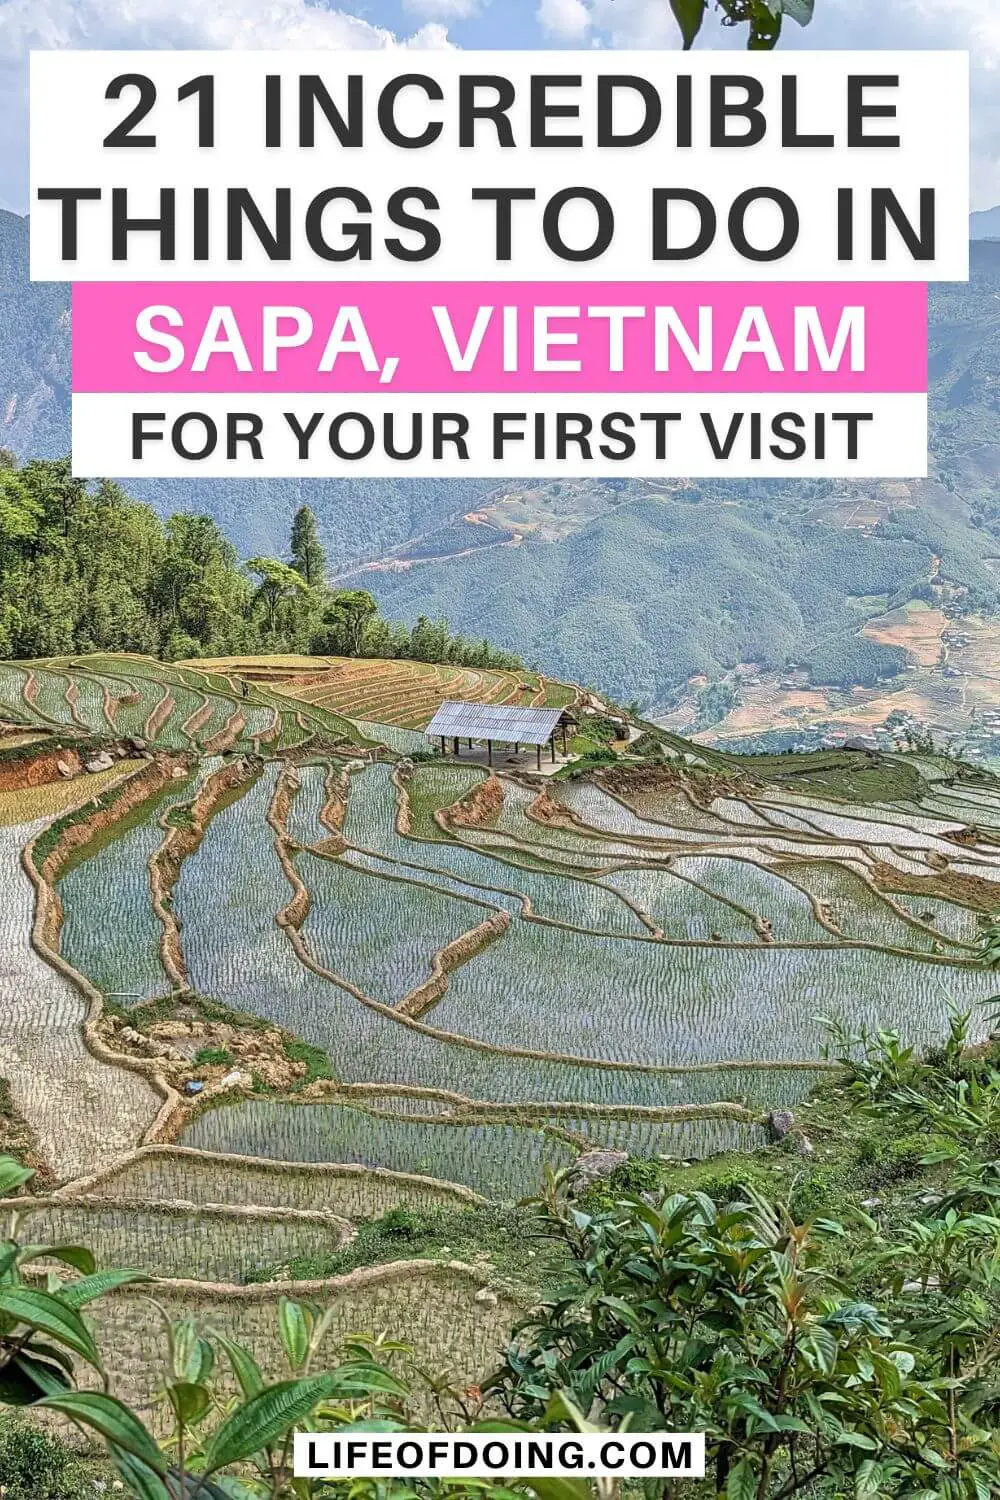 Newly planted rice in rice terraces of Sapa, Vietnam